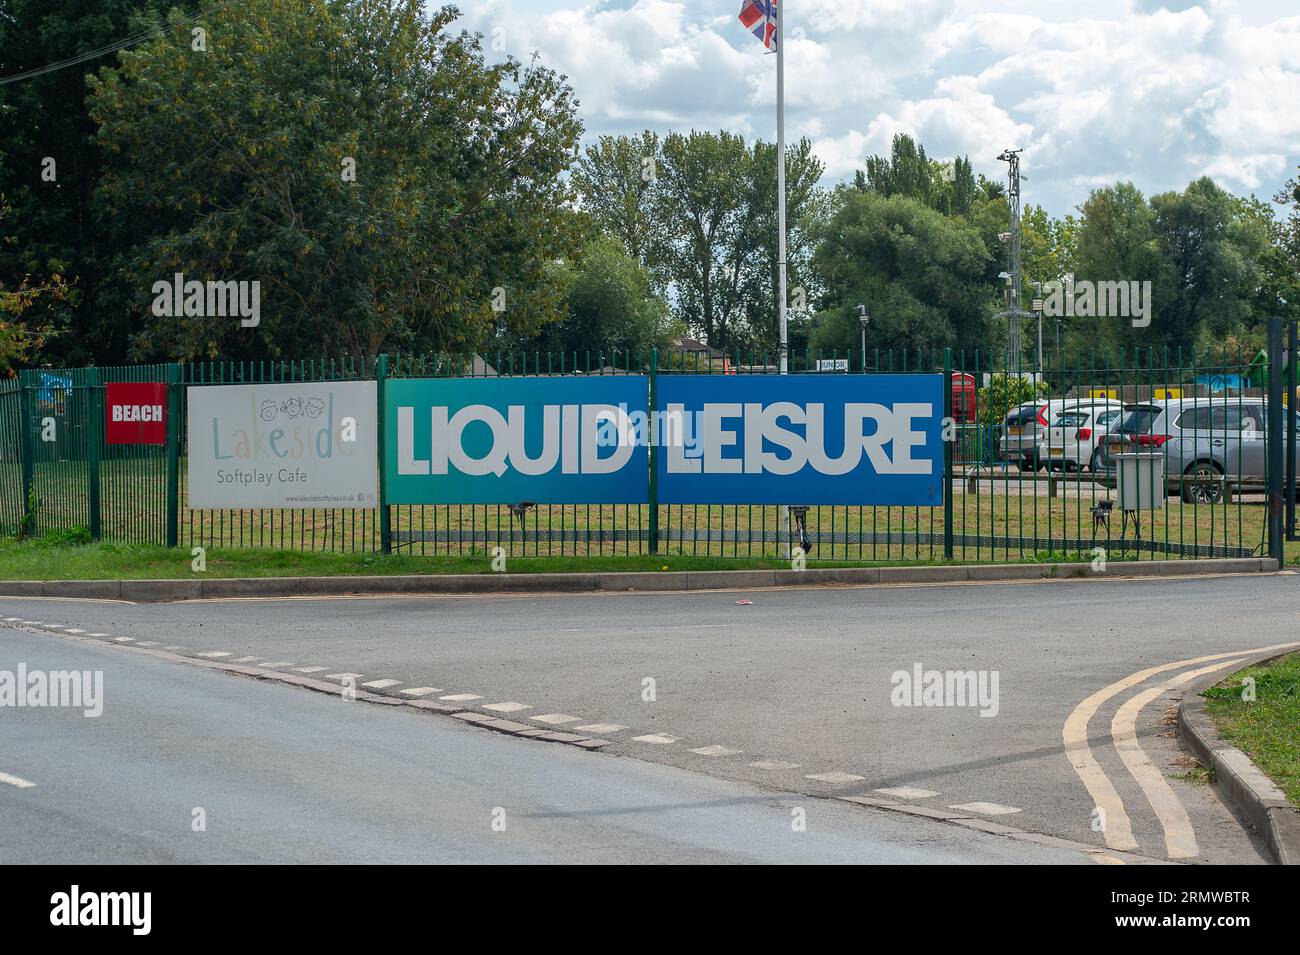 Datchet, Berkshire, UK. 30th August, 2023. The Liquid Leisure site in Datchet, Berkshire. Kyra Hill aged 11 attended a birthday party at Liquid Leisure on 6th August, 2022 but she was found just after 5.10pm and rushed to Wexham Park Hospital, where she was pronounced dead. At a hearing yesterday at the Berkshire Coroner's Court, the Senior Coroner, reporting on the post mortem, found that Kyra Hill, tragically died from drowning. Credit: Maureen McLean/Alamy Live News Stock Photo